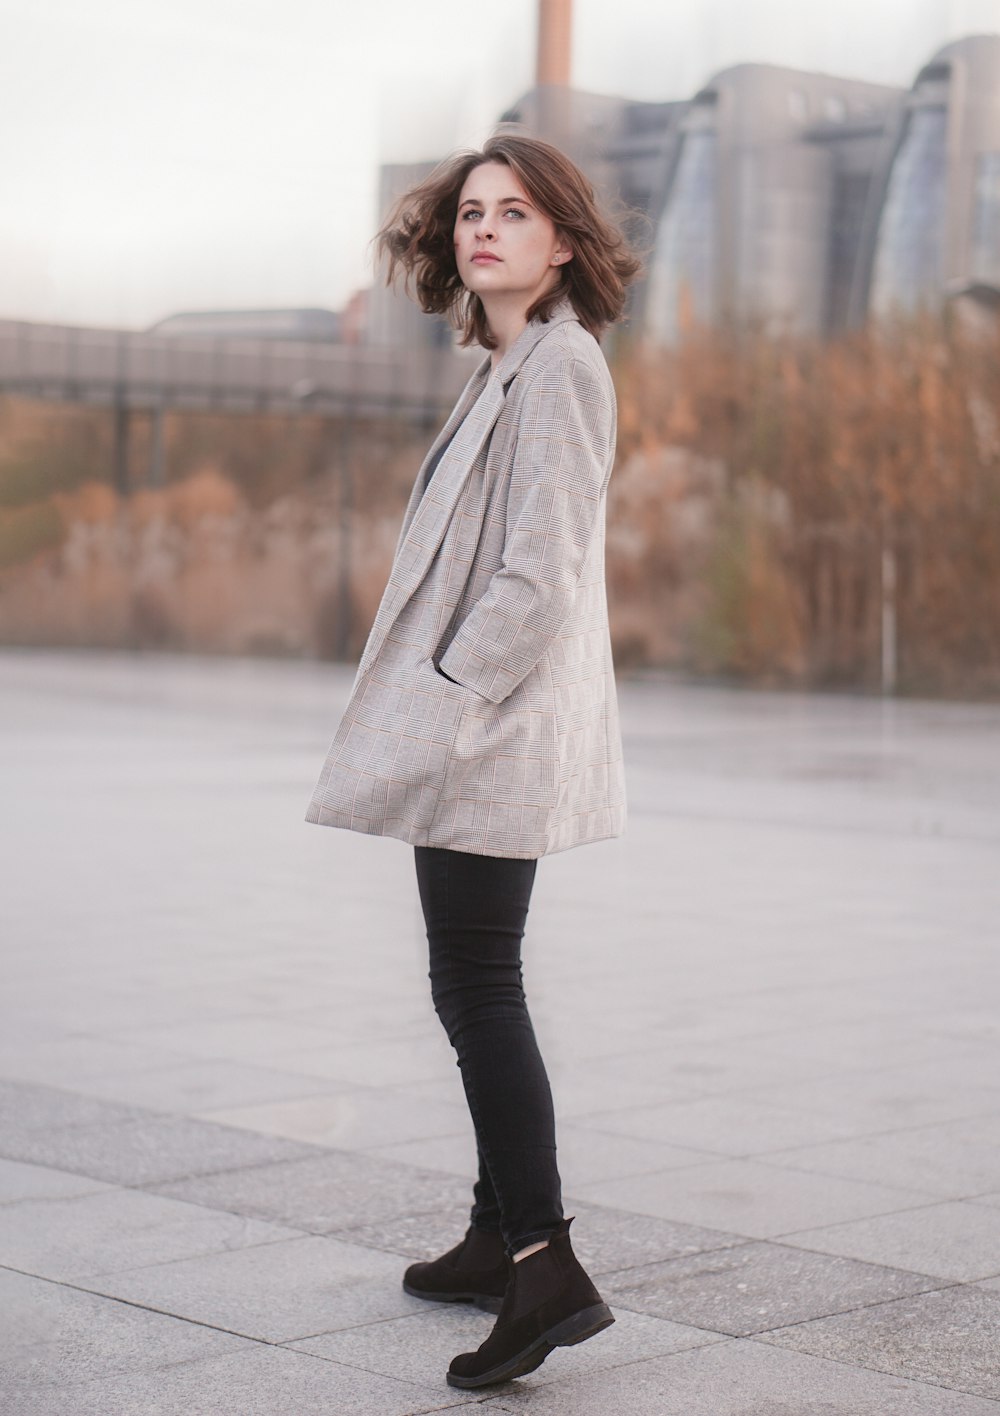 woman in gray coat and black leggings standing on gray concrete floor during daytime